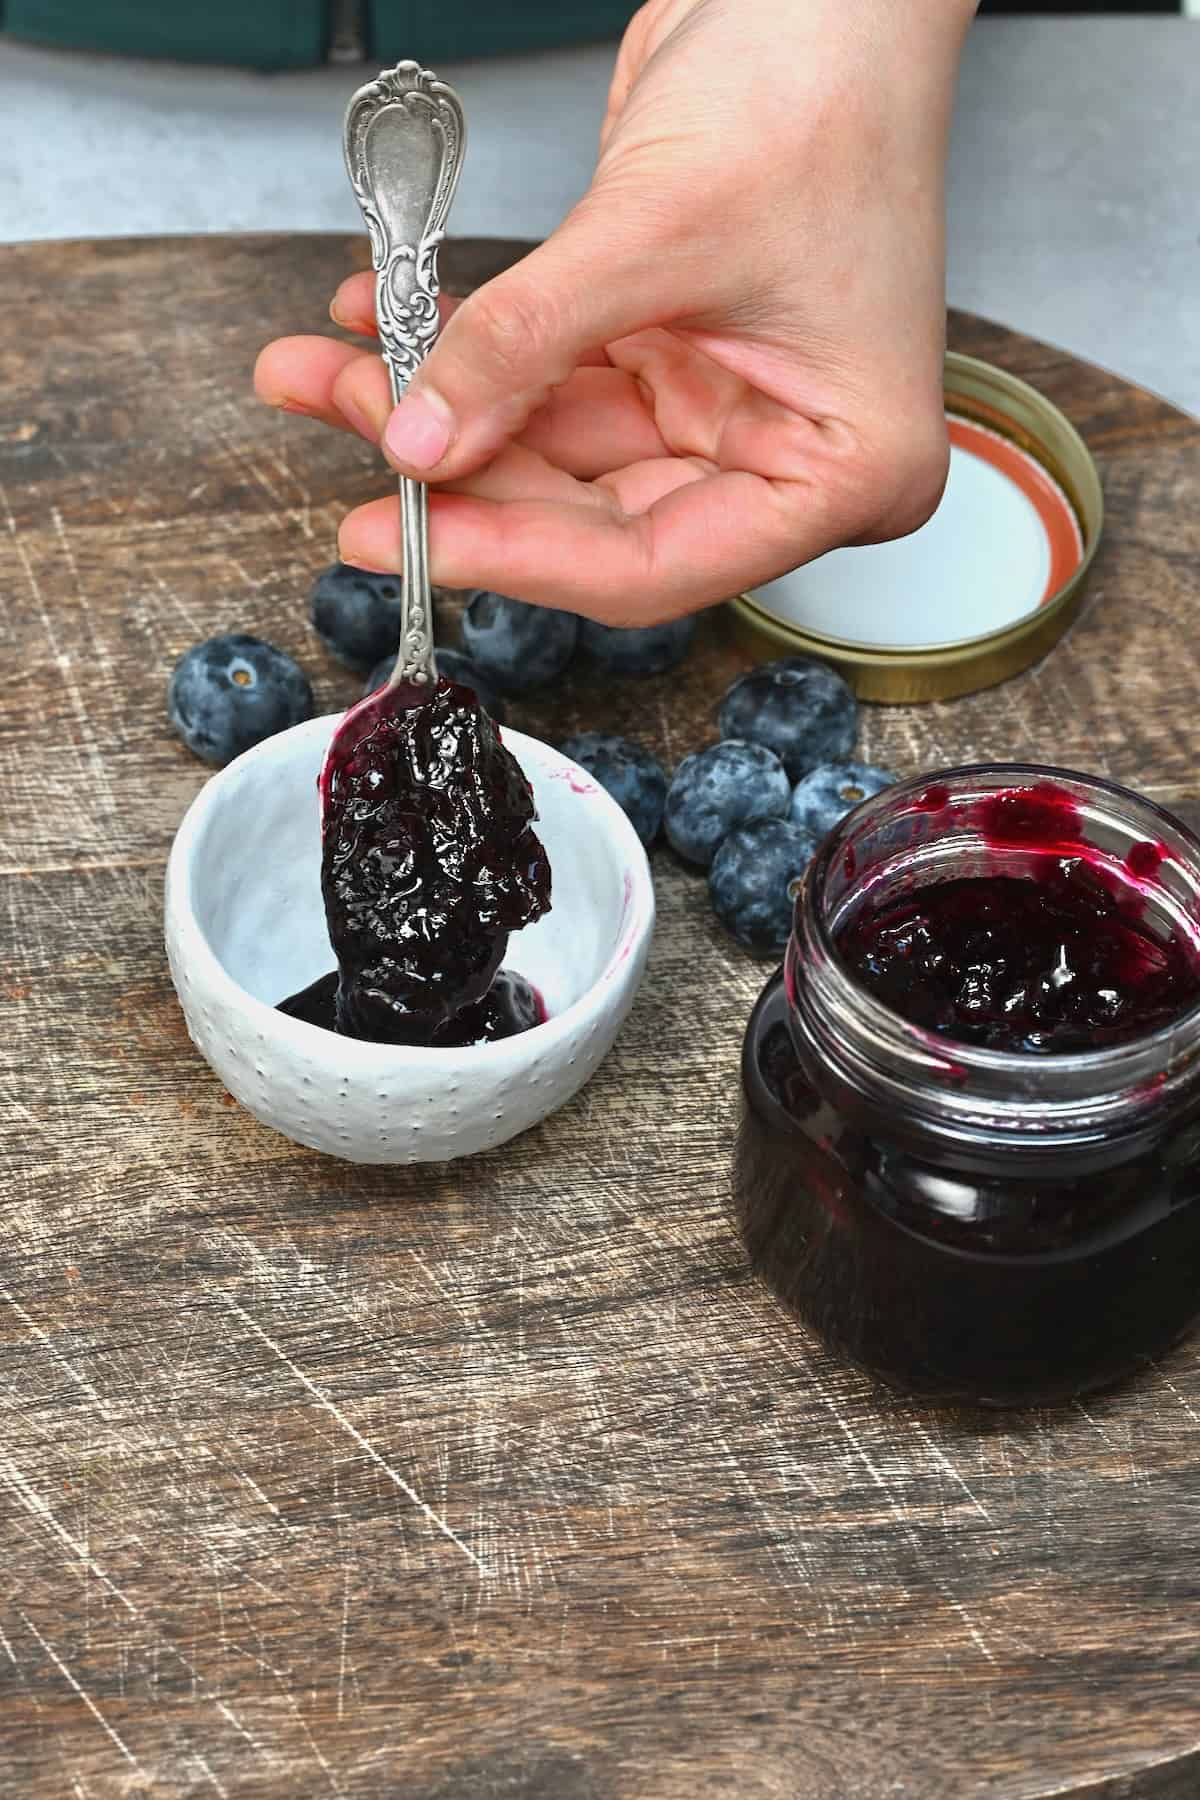 A spoonful of homemade blueberry jam